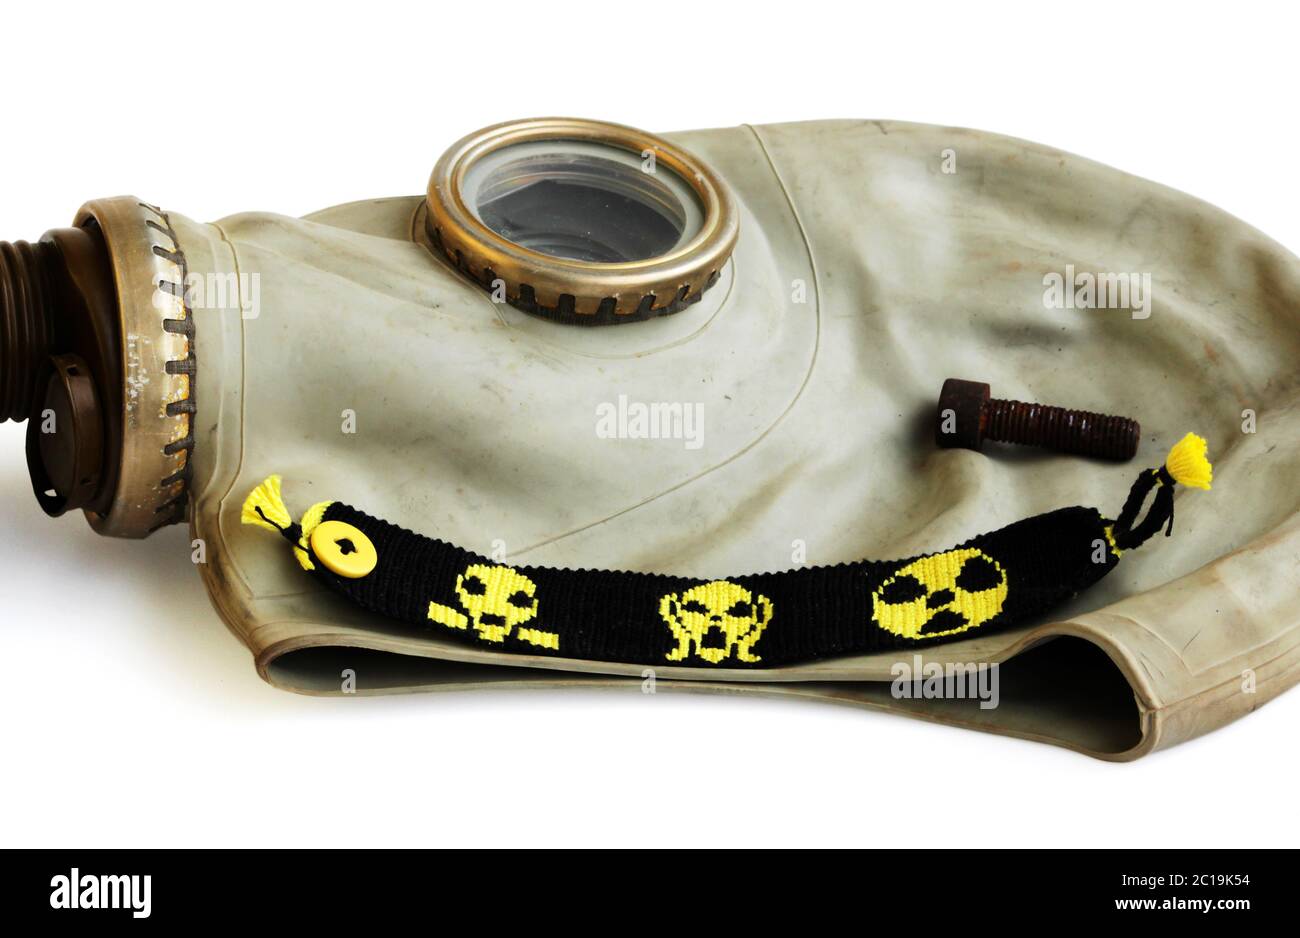 trophies of the stalker: old Russian gas mask, rusty nail and yellow-black baubles on a white background. Stock Photo